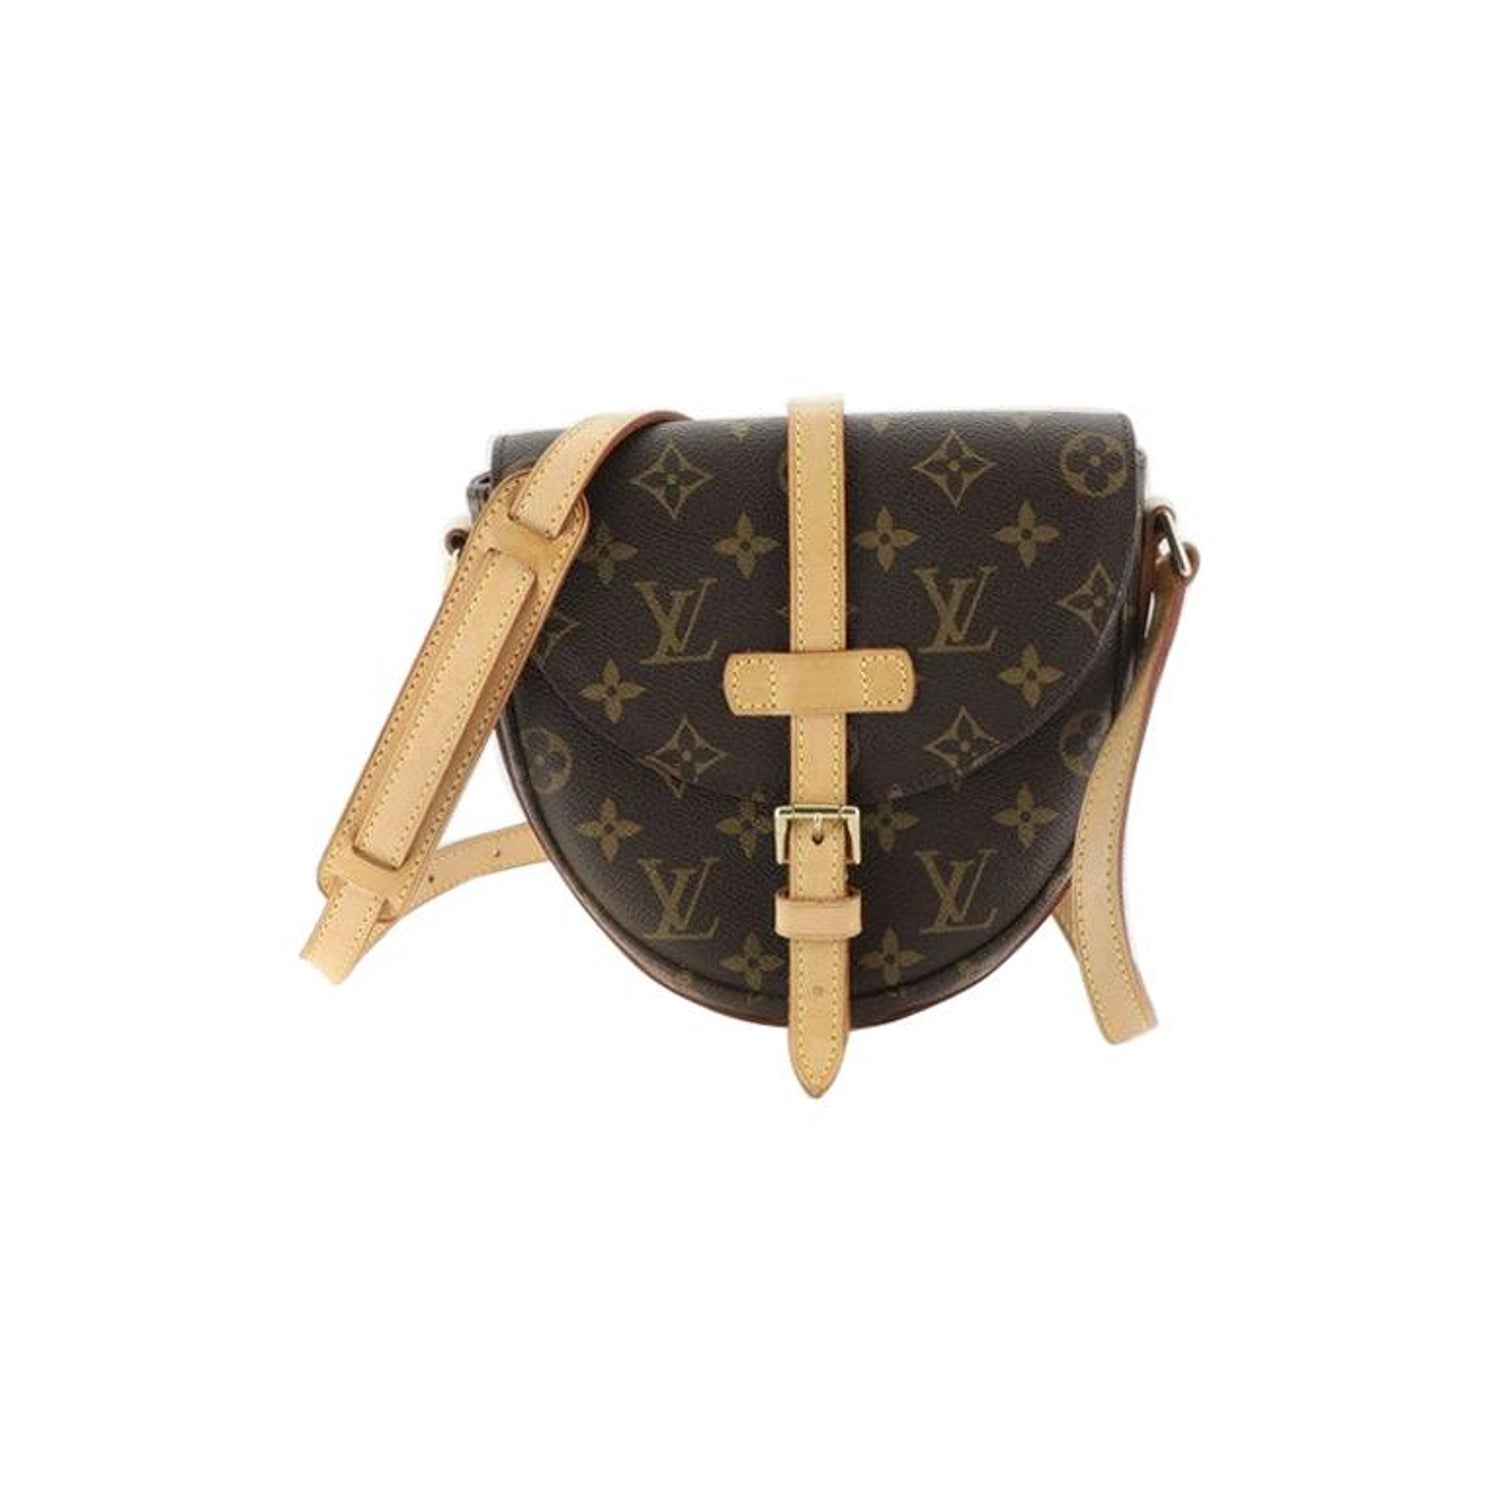 Louis Vuitton Chantilly - For Sale on 1stDibs  louis vuitton chantilly  new, louis vuitton chantilly crossbody bag, lv chantilly pm